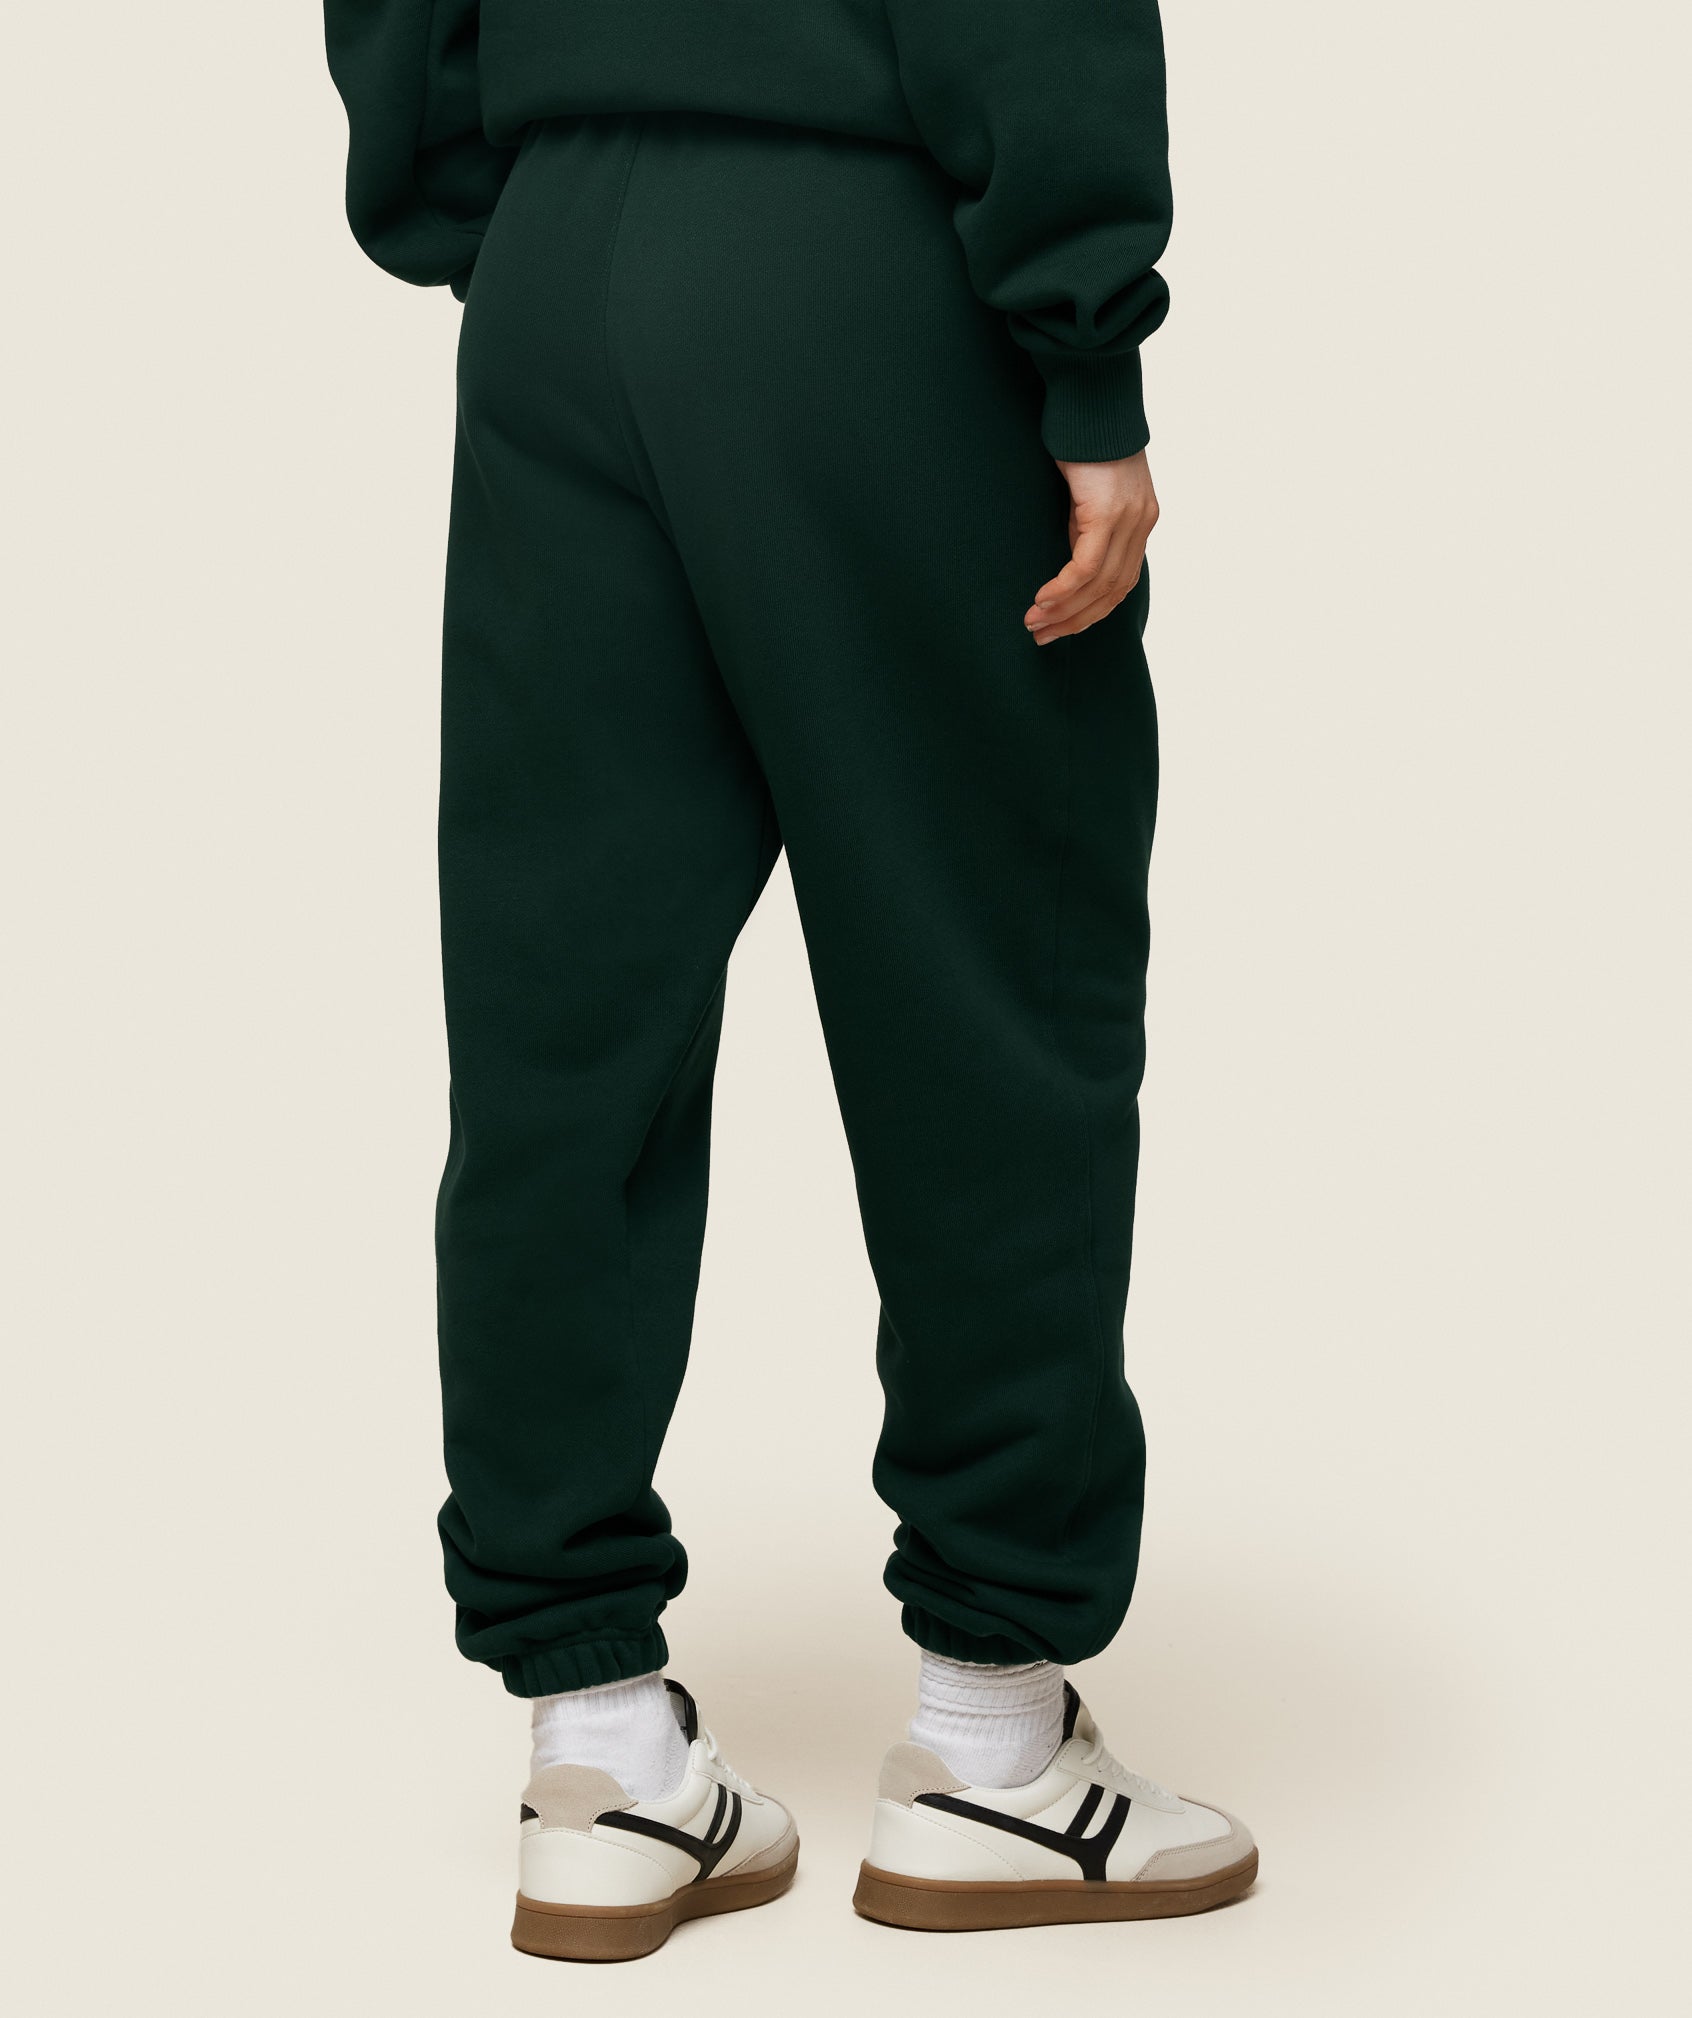 Phys Ed Graphic Sweatpants in Green - view 4